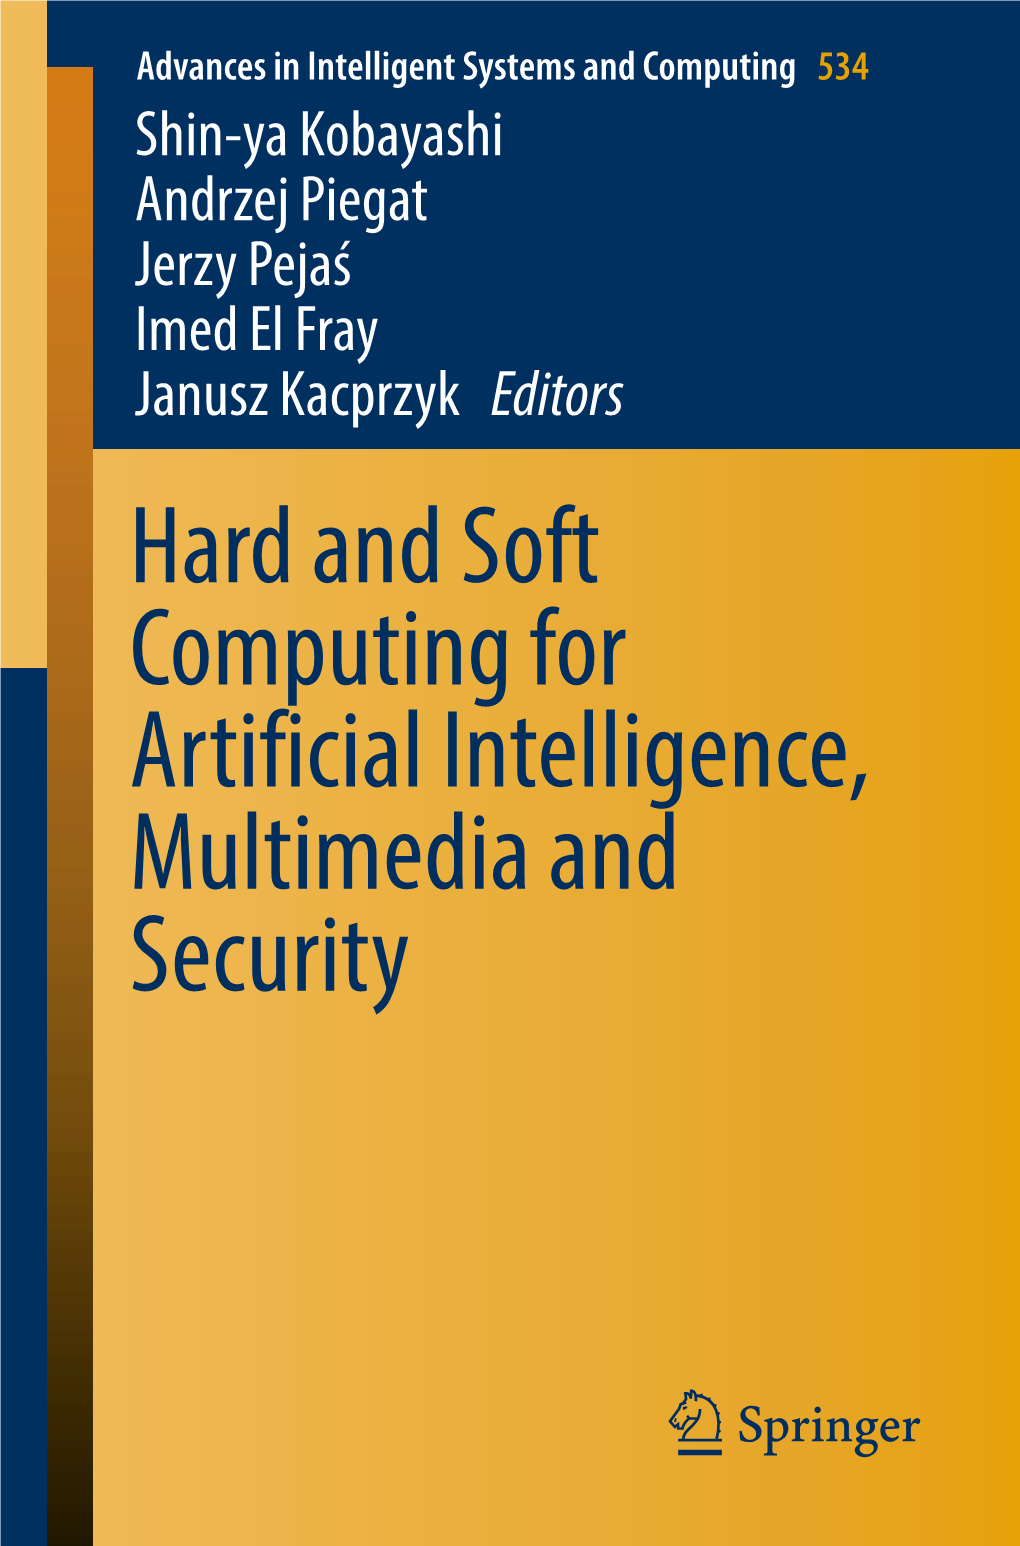 Hard and Soft Computing for Artificial Intelligence, Multimedia and Security Advances in Intelligent Systems and Computing